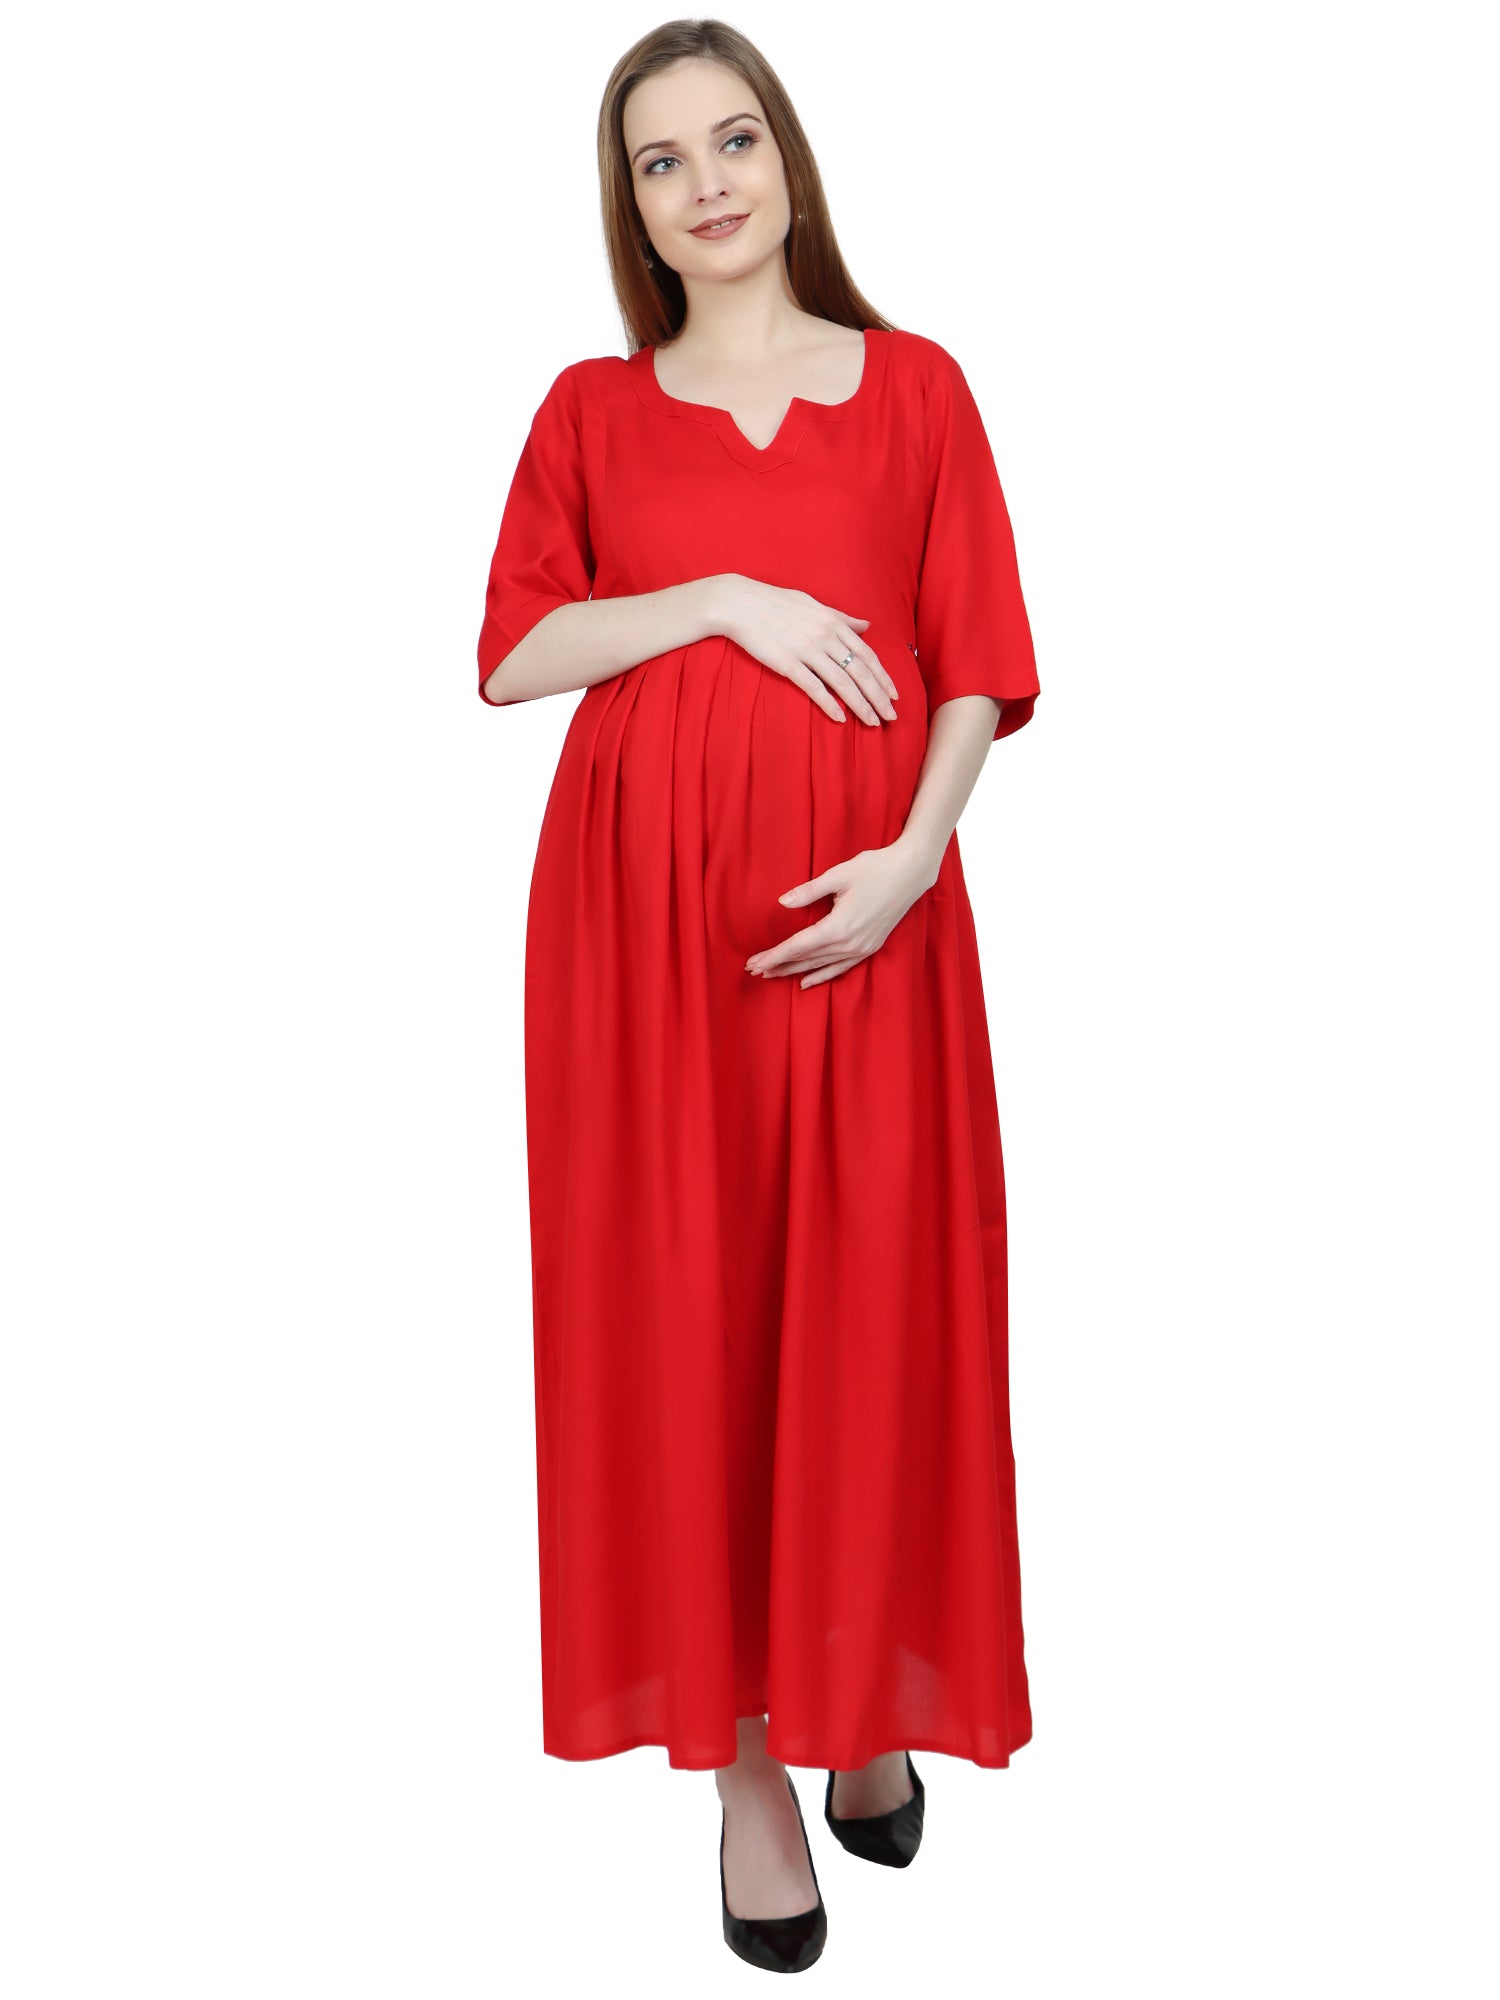 Buy Mylo Essentials Maternity Dress For Women With Breastfeeding  Zippers|Maxi Dress|Adjustable Belt For Growing Belly|Day & Night Comfort|Feeding  Dress For Pre & Post Pregnancy|Ditsy Daisy|Medium, Pink at Amazon.in